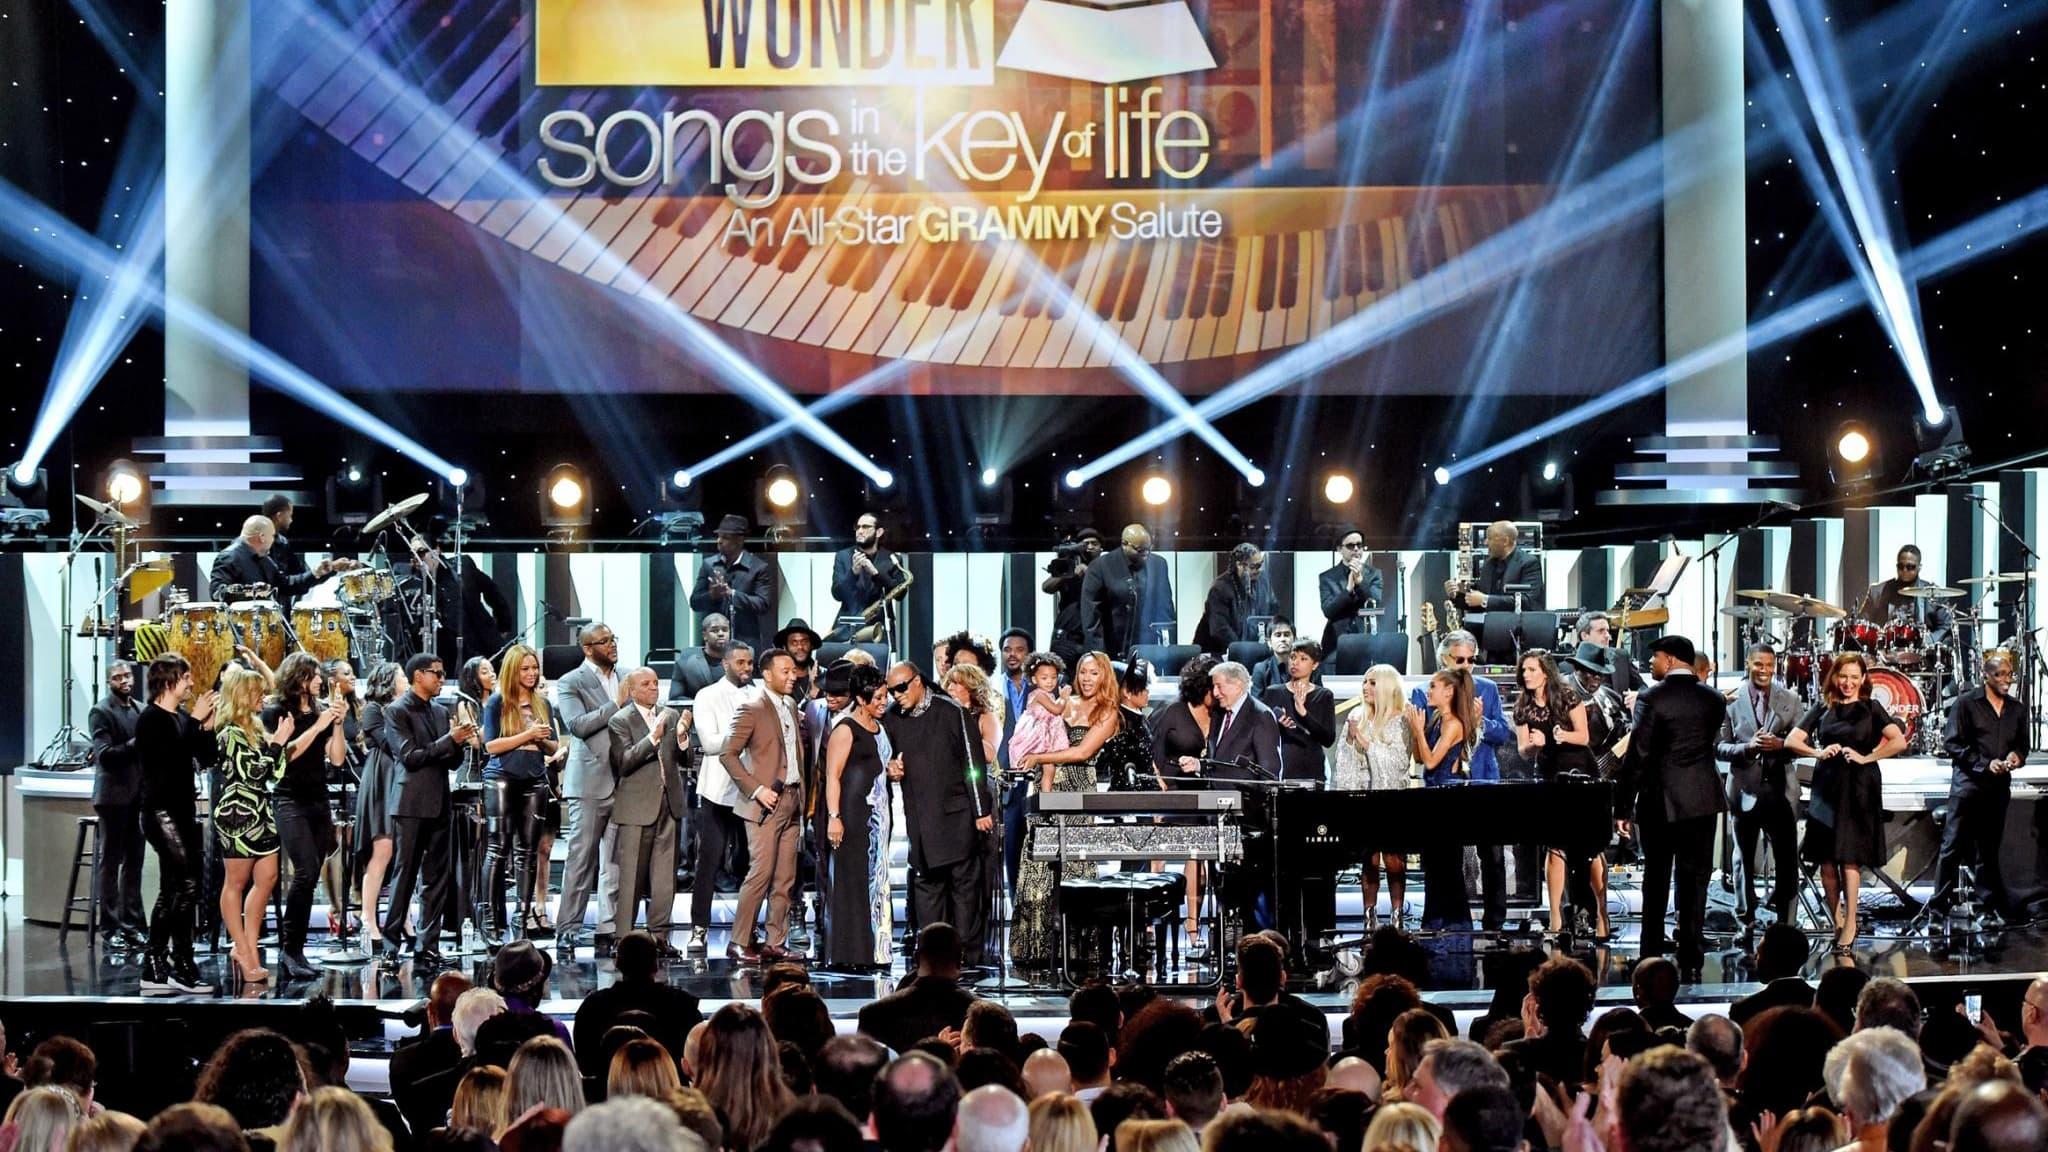 Stevie Wonder: Songs in the Key of Life - An All-Star Grammy Salute backdrop